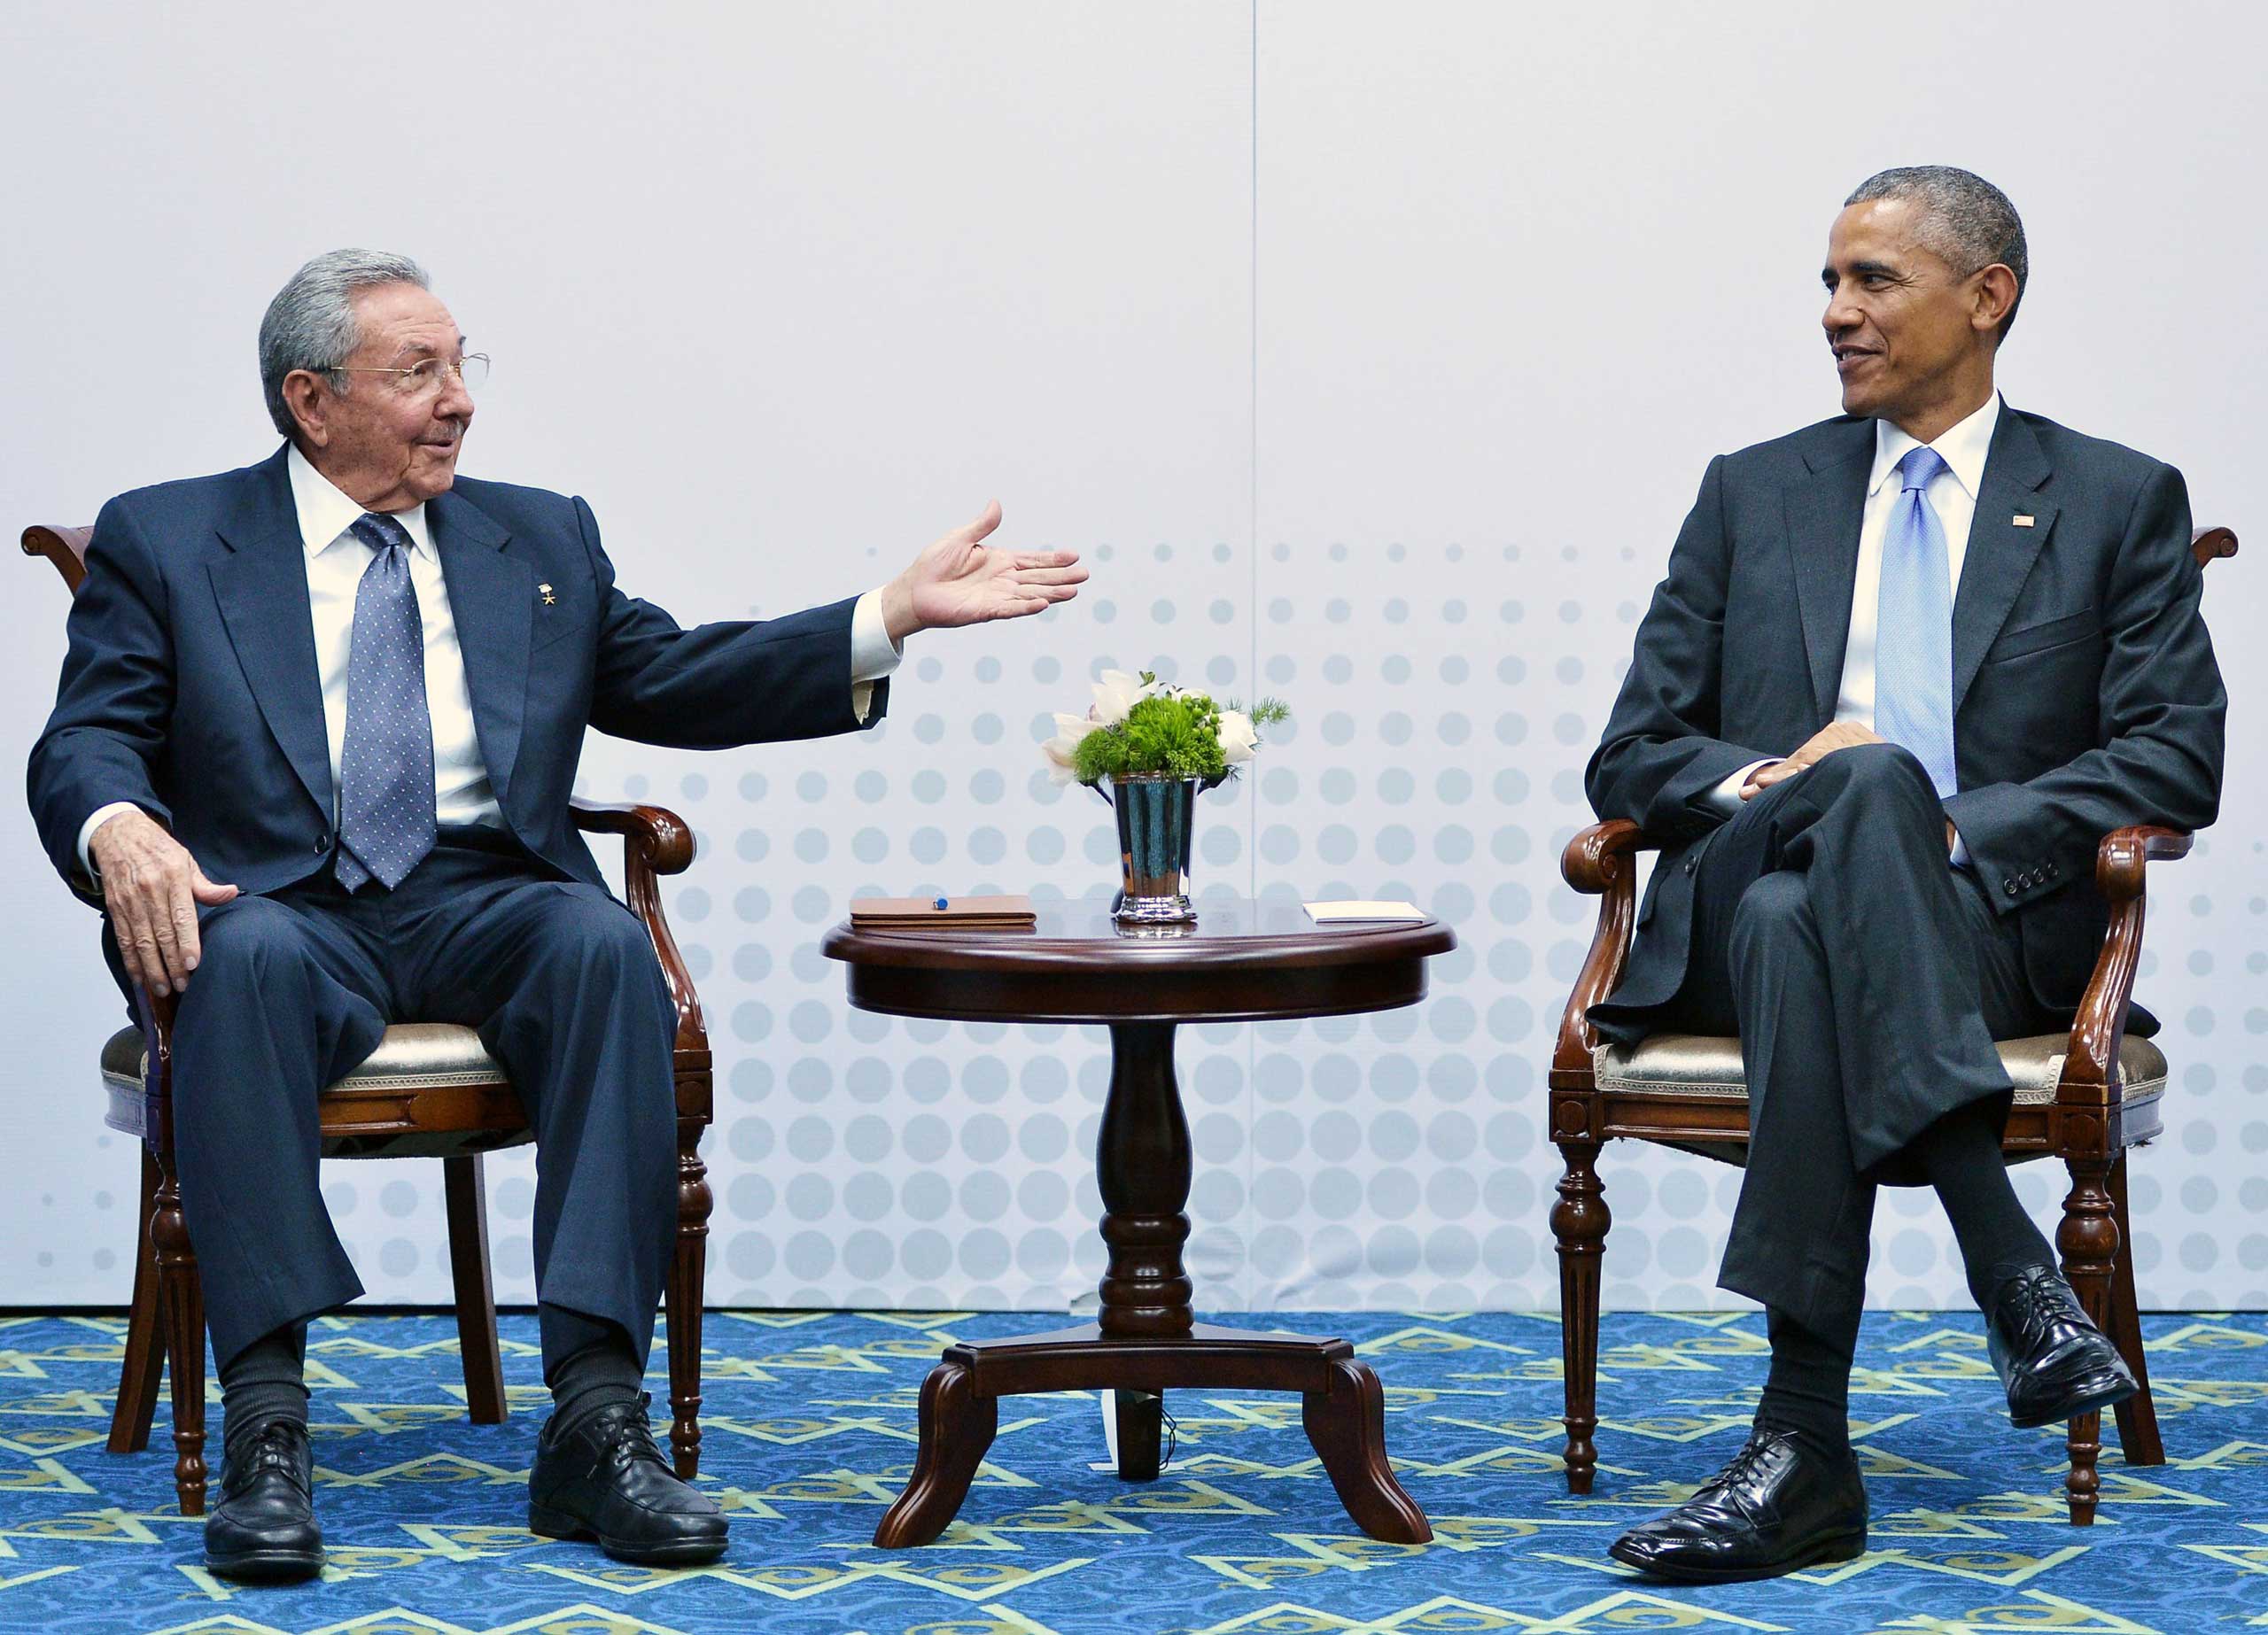 Cuban President Raul Castro speaks during a meeting with President Barack Obama on the sidelines of the Summit of the Americas at the ATLAPA Convention center in Panama City, on April 11, 2015.